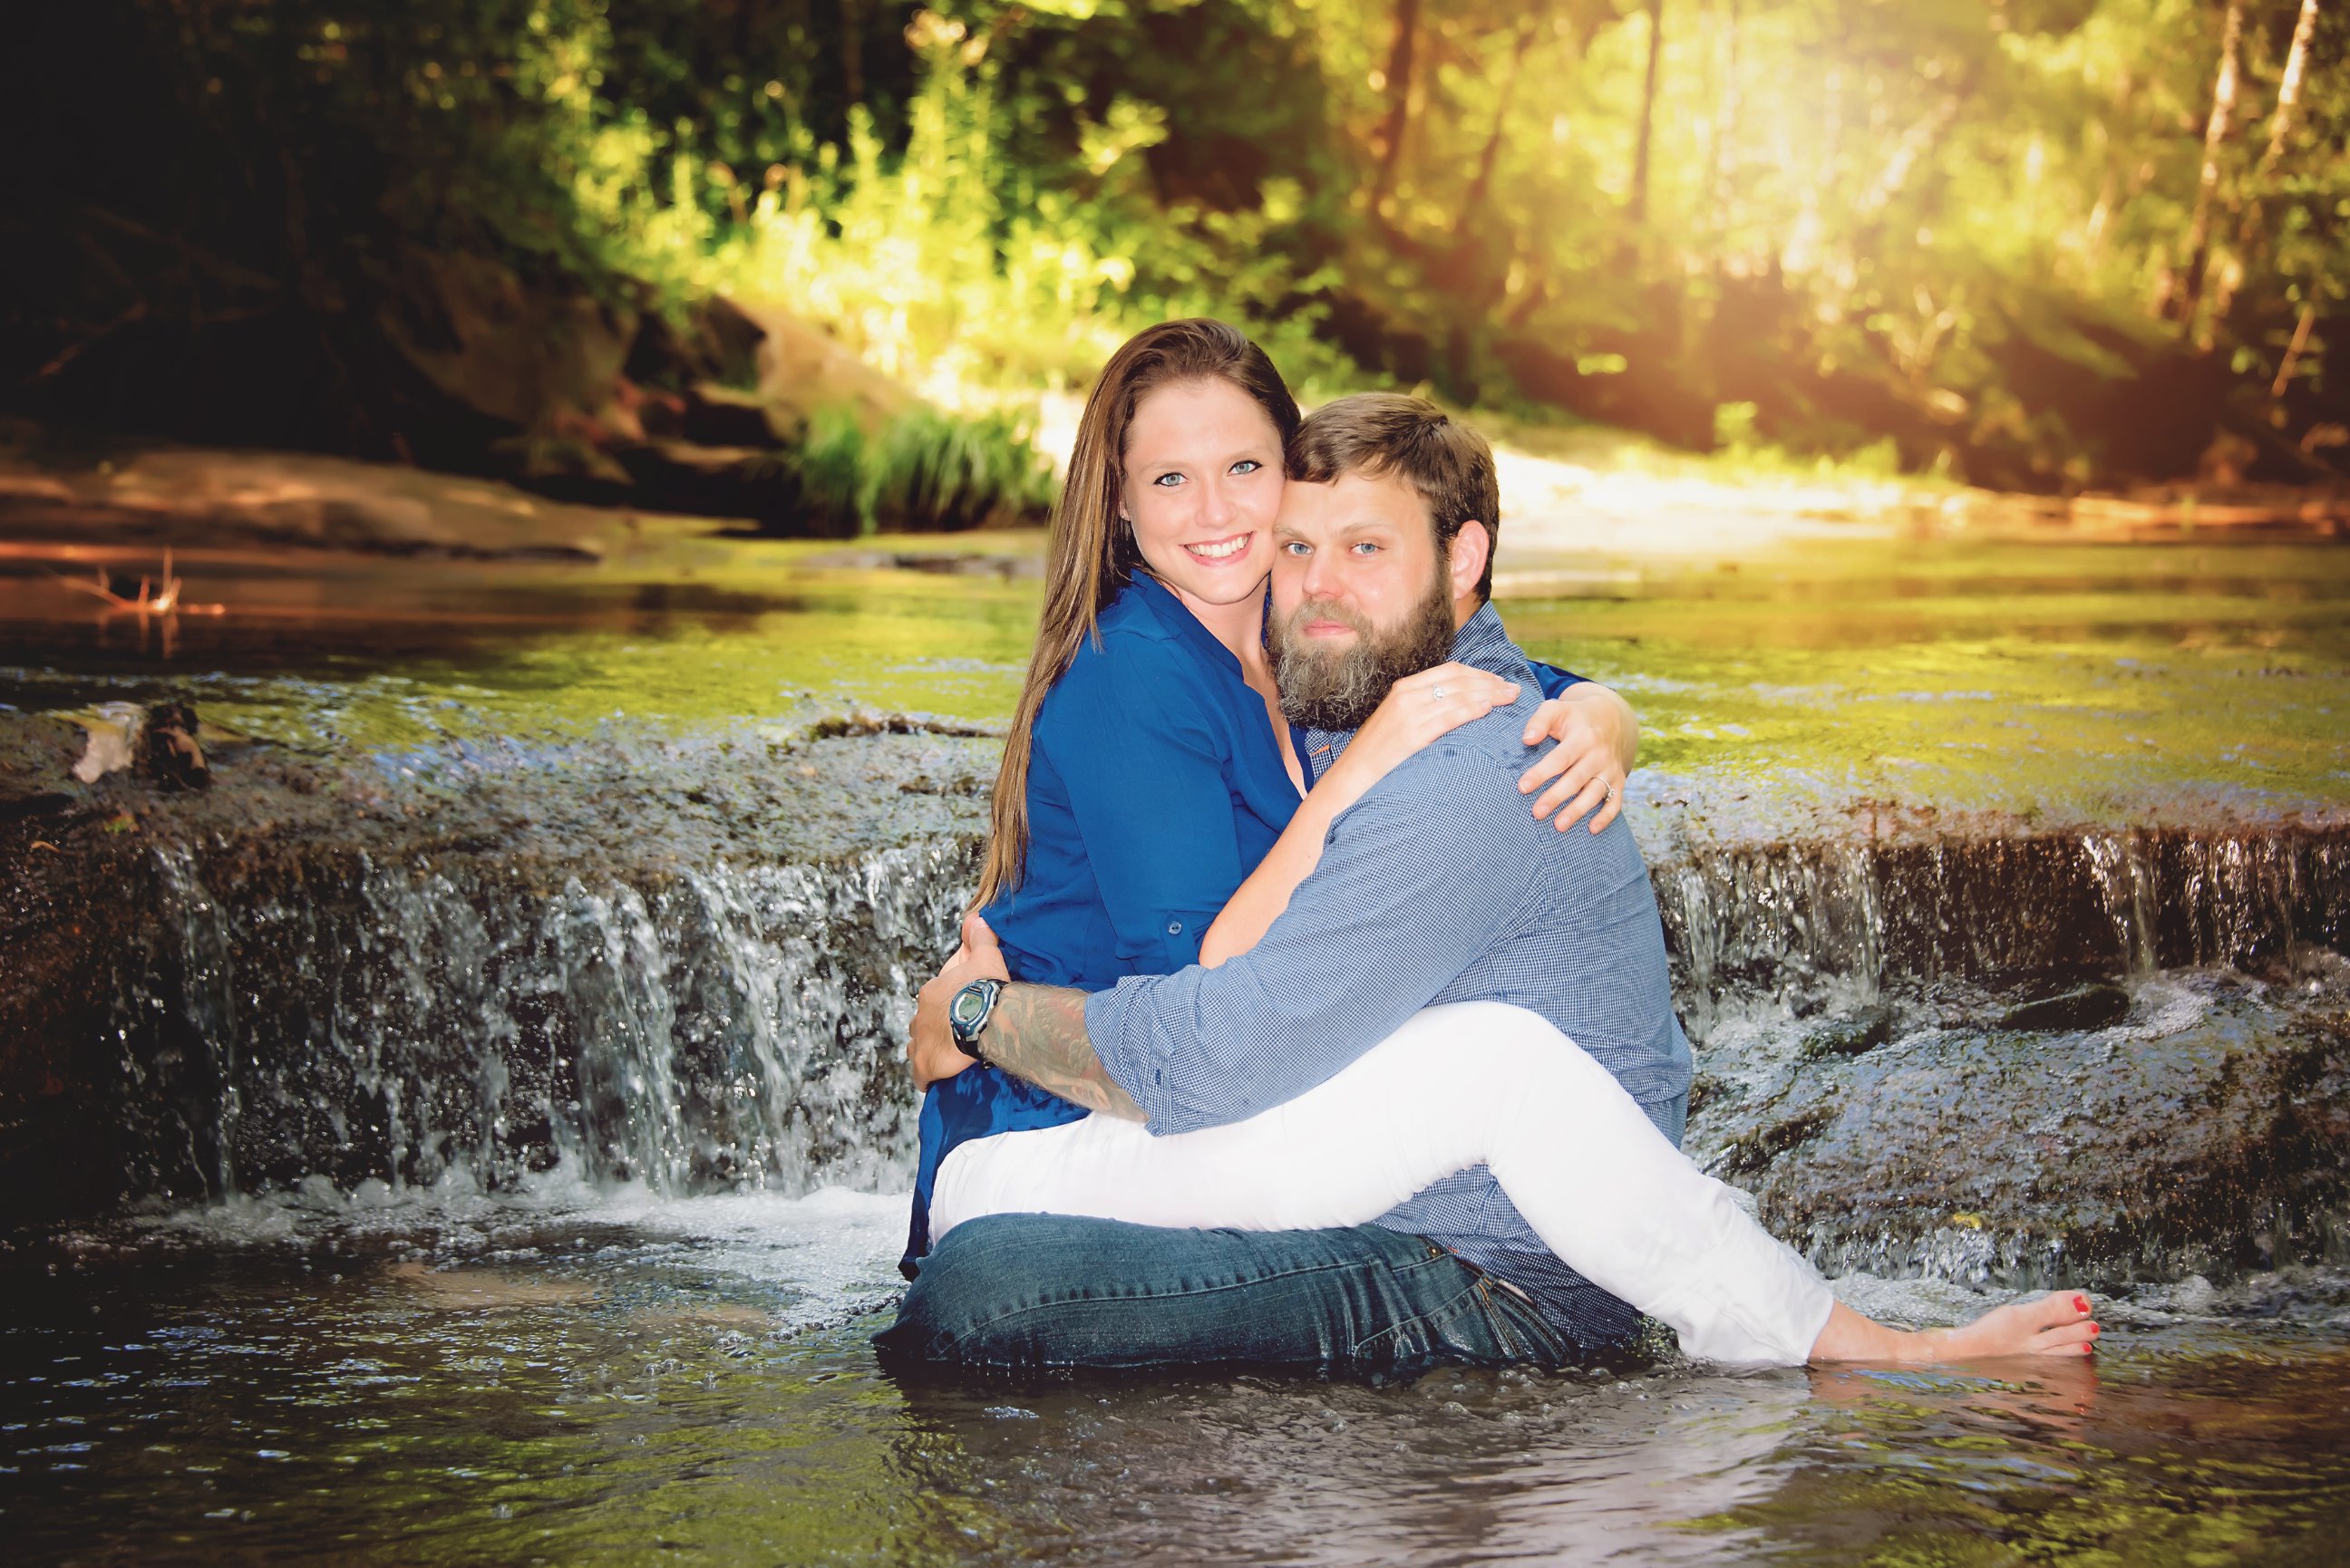 Engagement shoot in the water - Becky Nichols Portrait